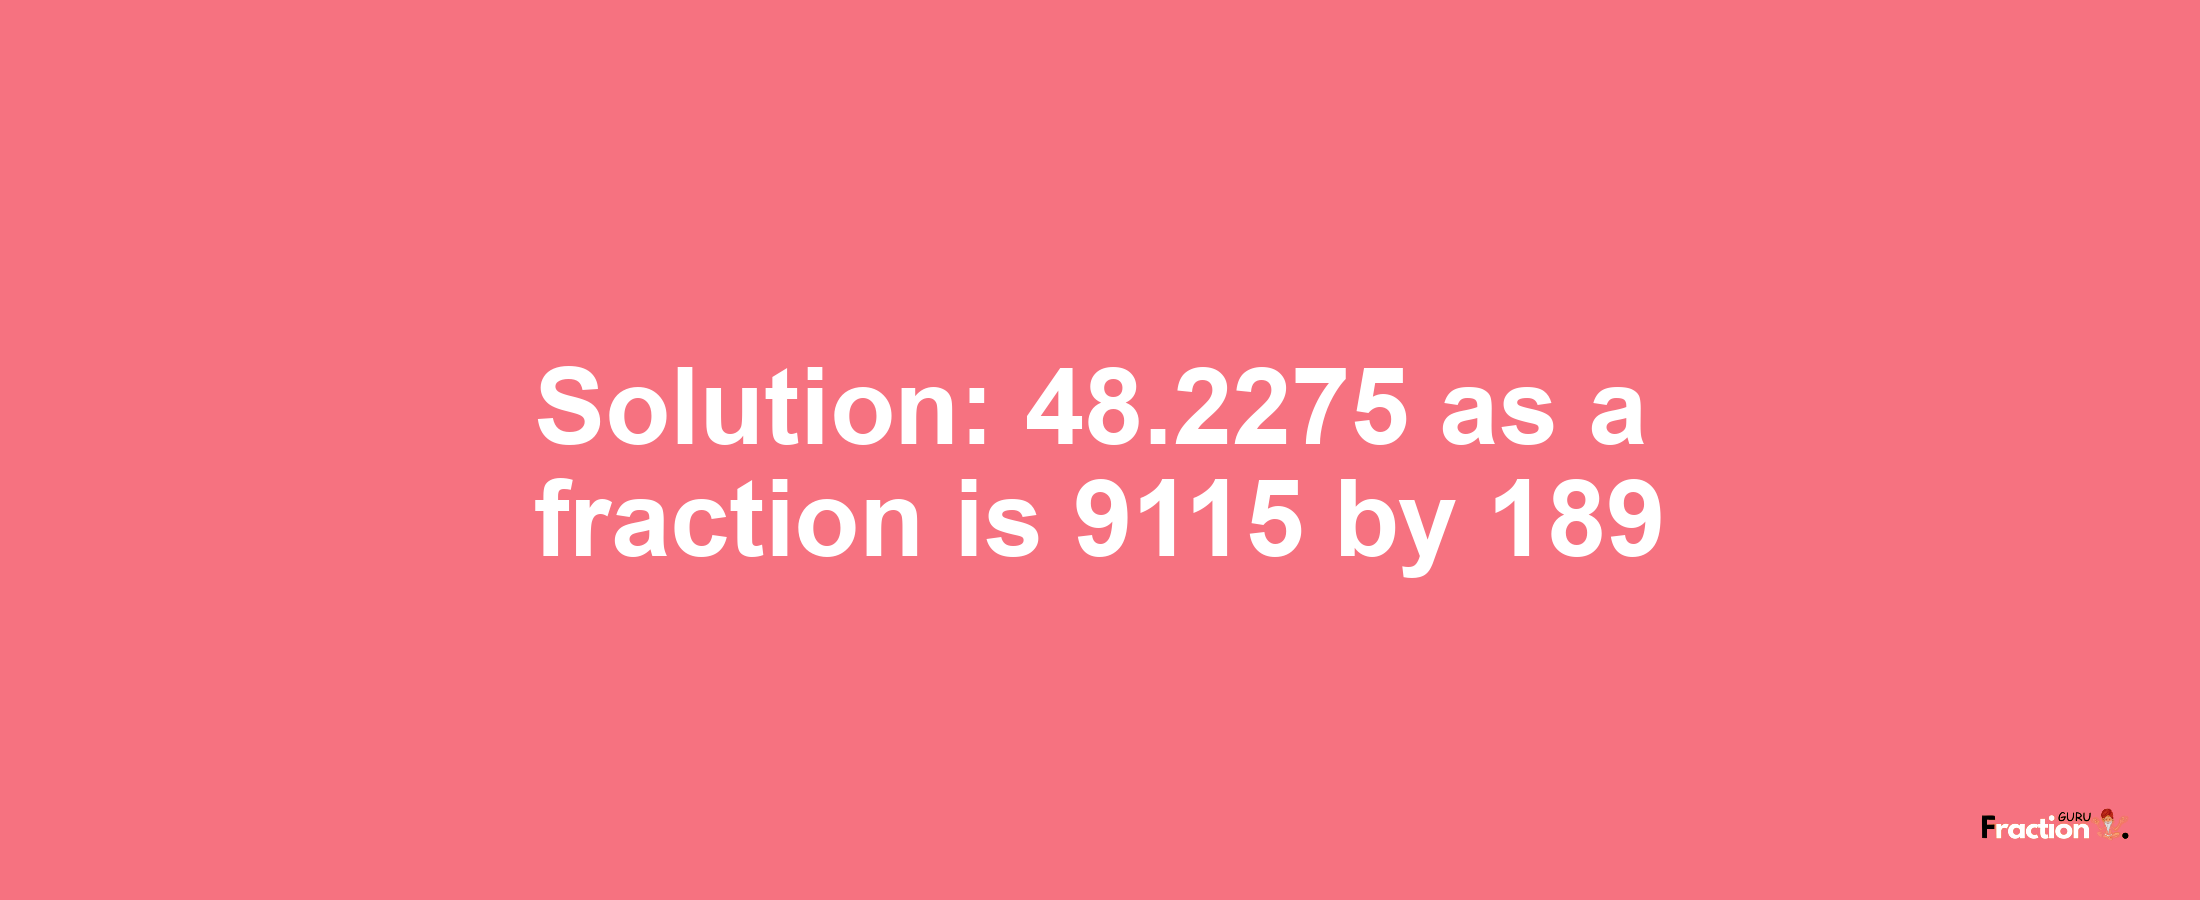 Solution:48.2275 as a fraction is 9115/189